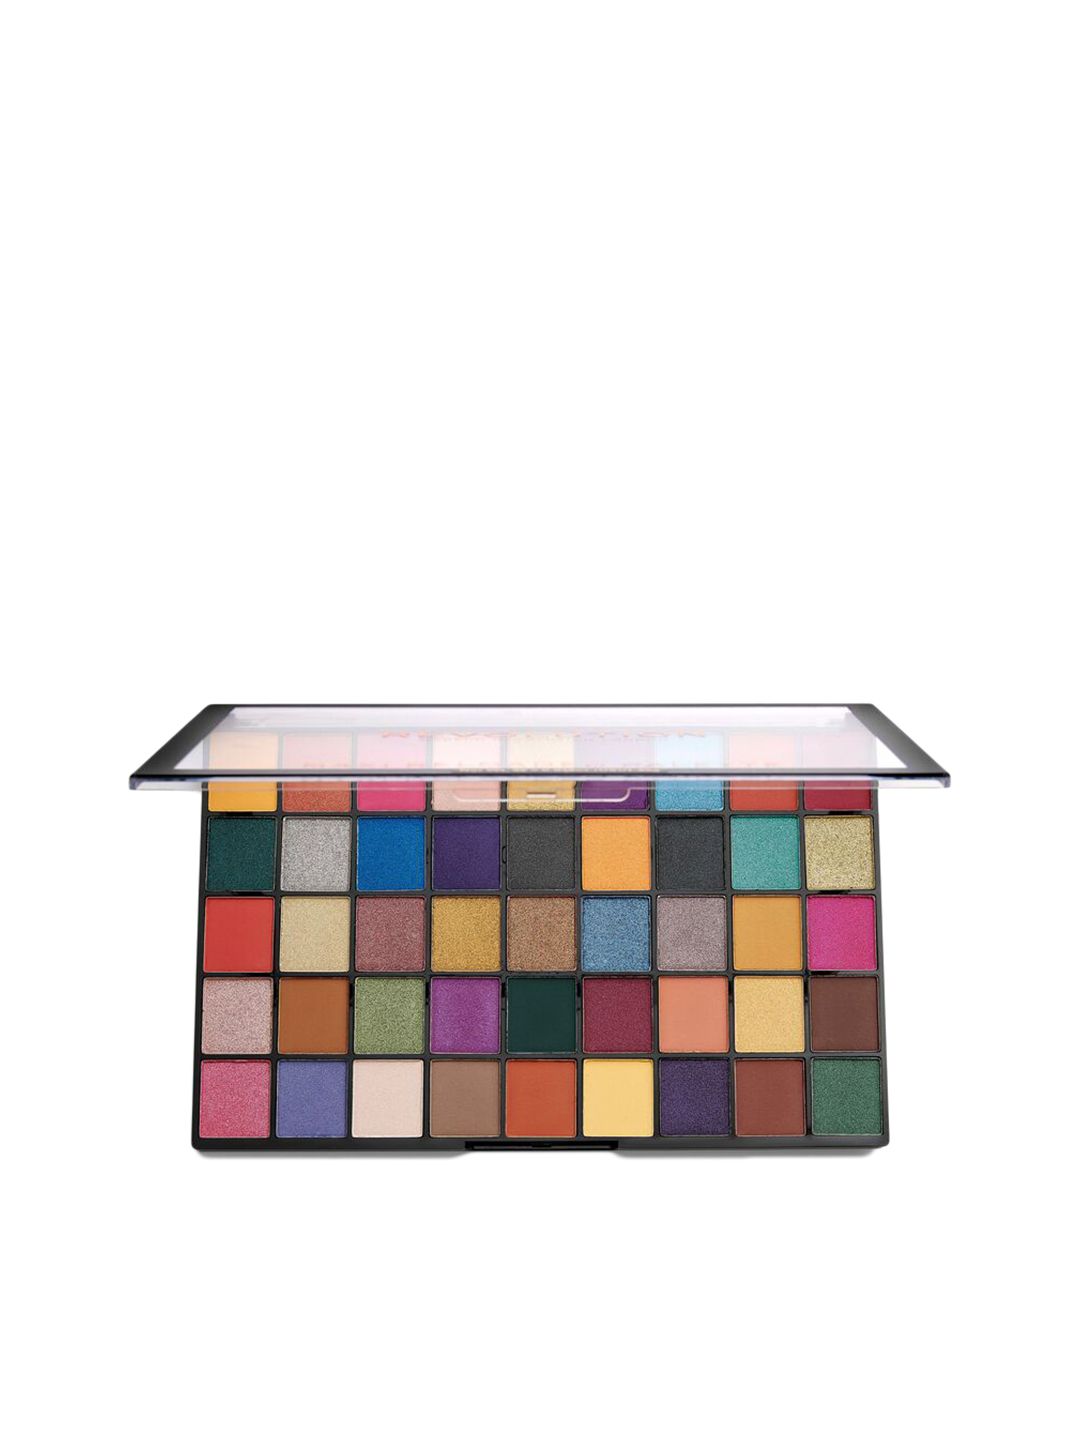 Makeup Revolution London Maxi Reloaded Eyeshadow Palette - Dream Big Price in India